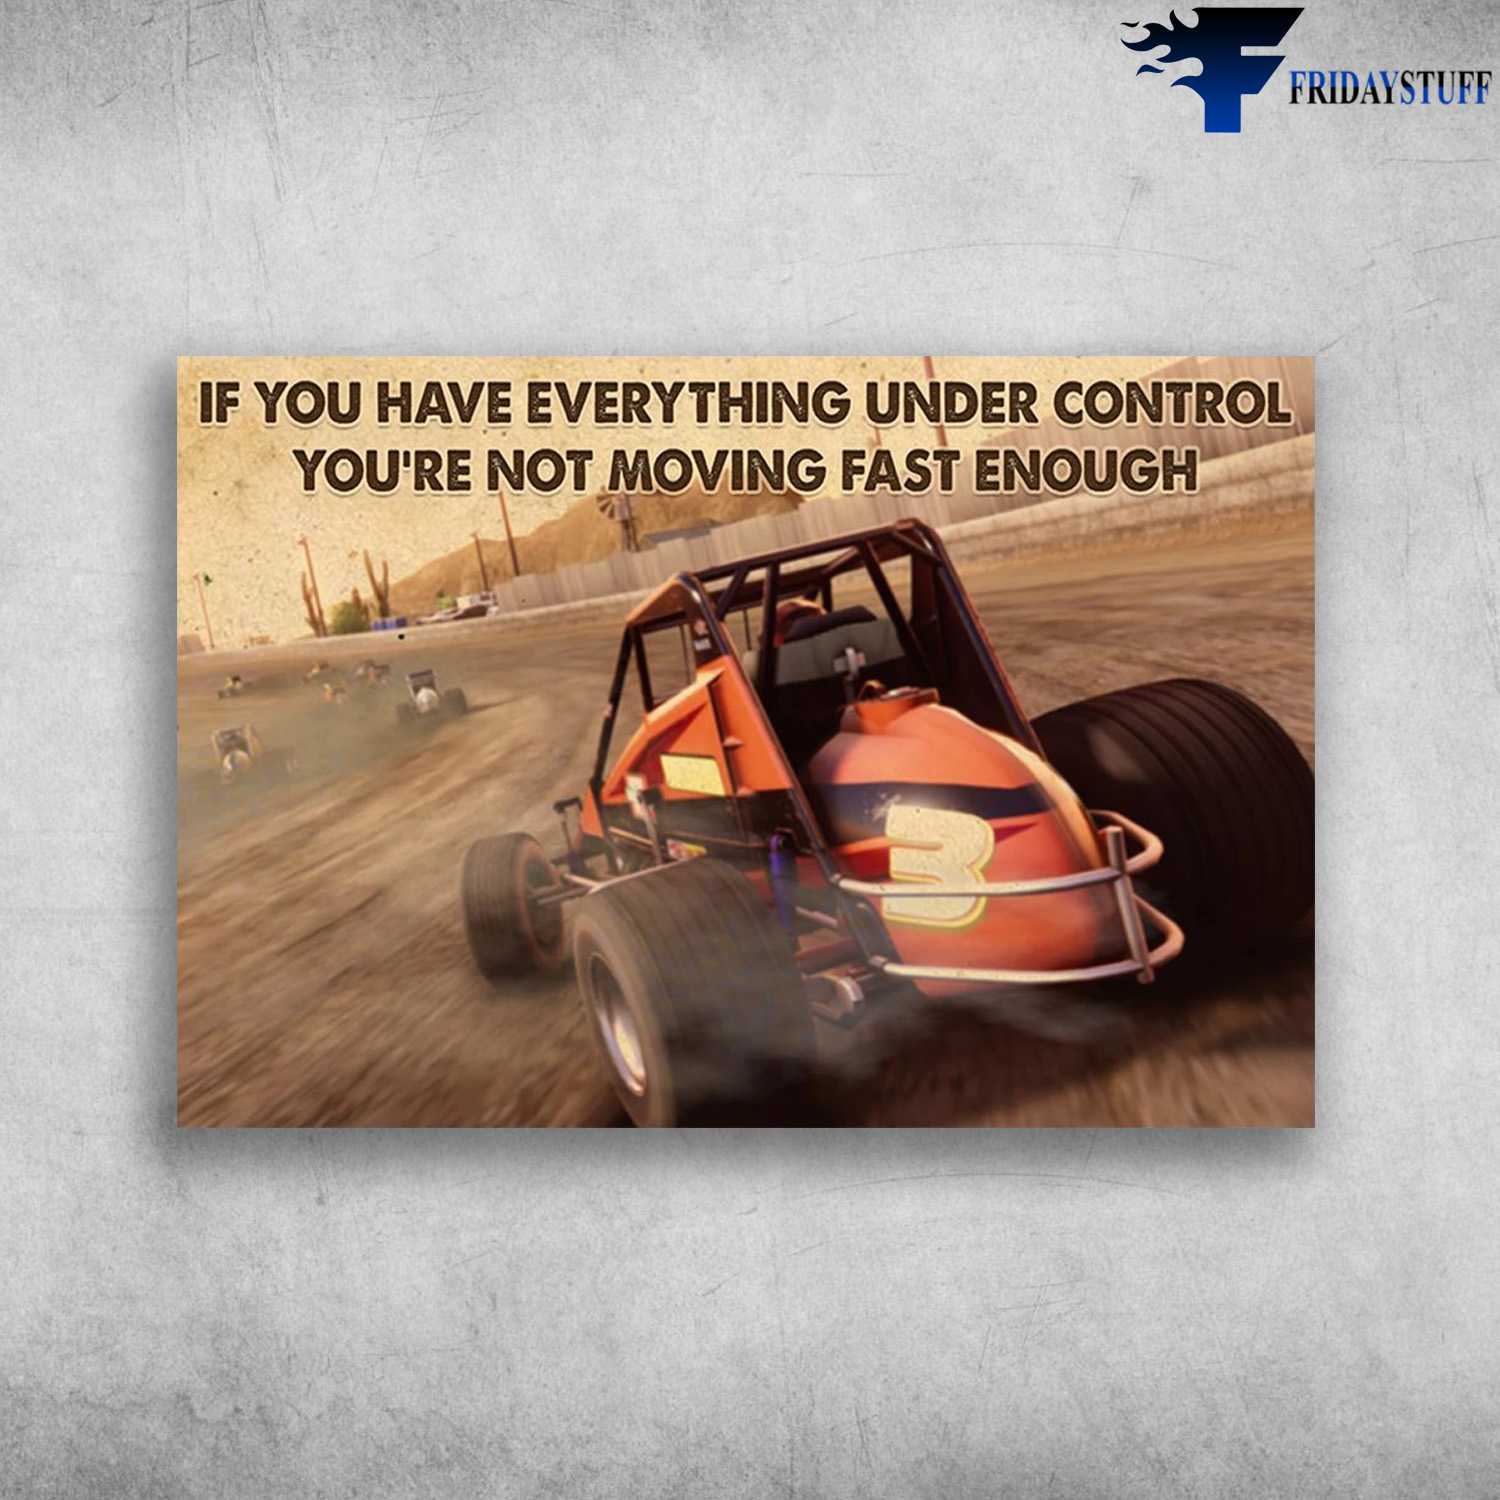 Car Racing - If You Have Everything Under Control, You're Not Moving Fast Enough